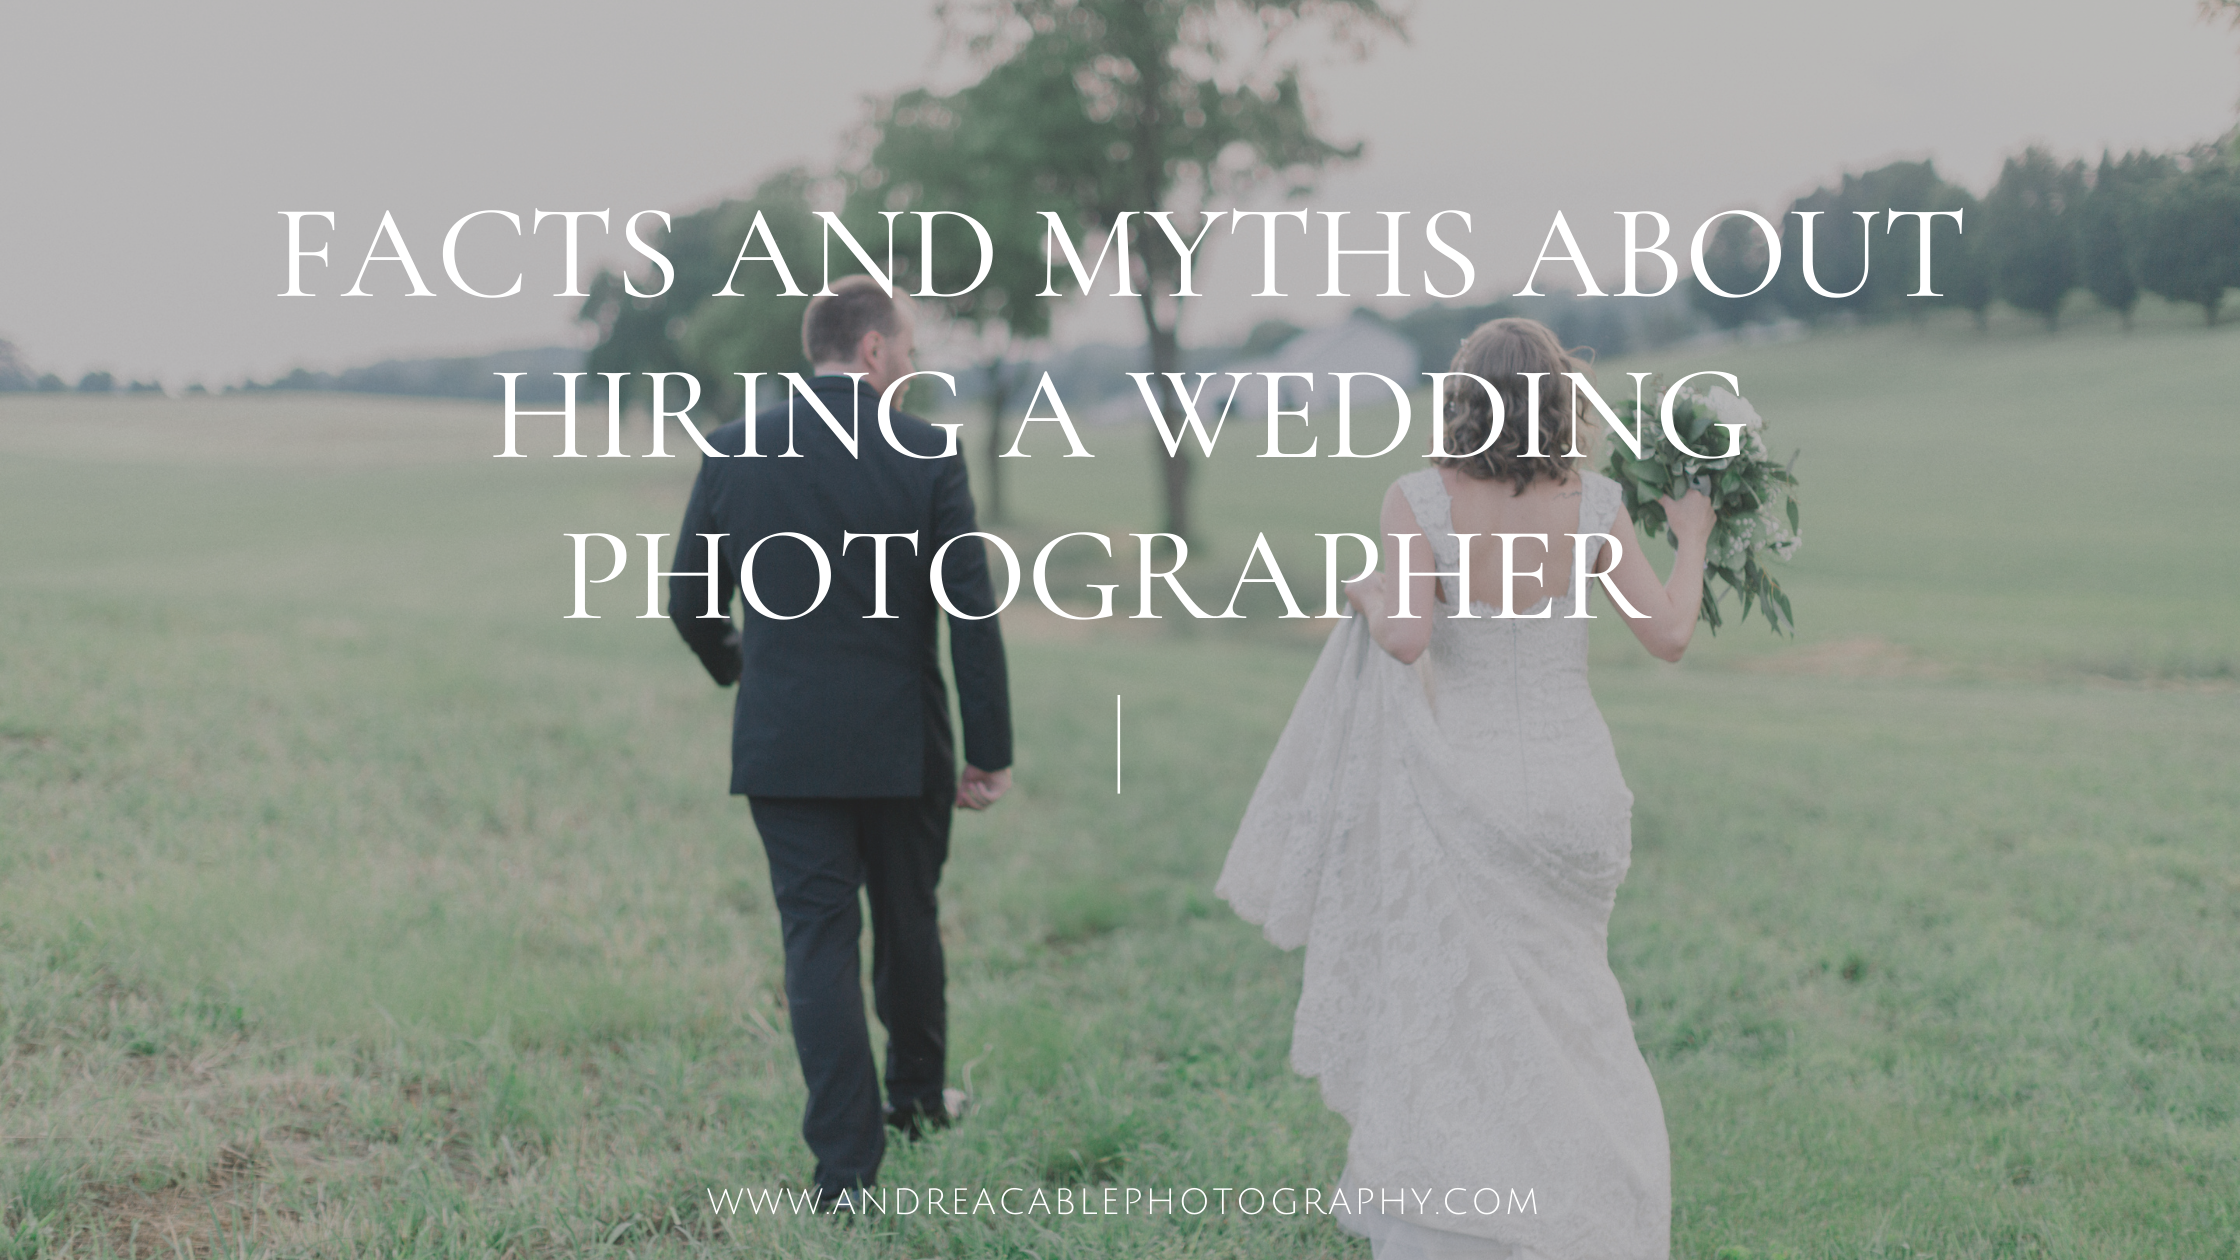 Facts and Myths About Hiring a Wedding Photographer